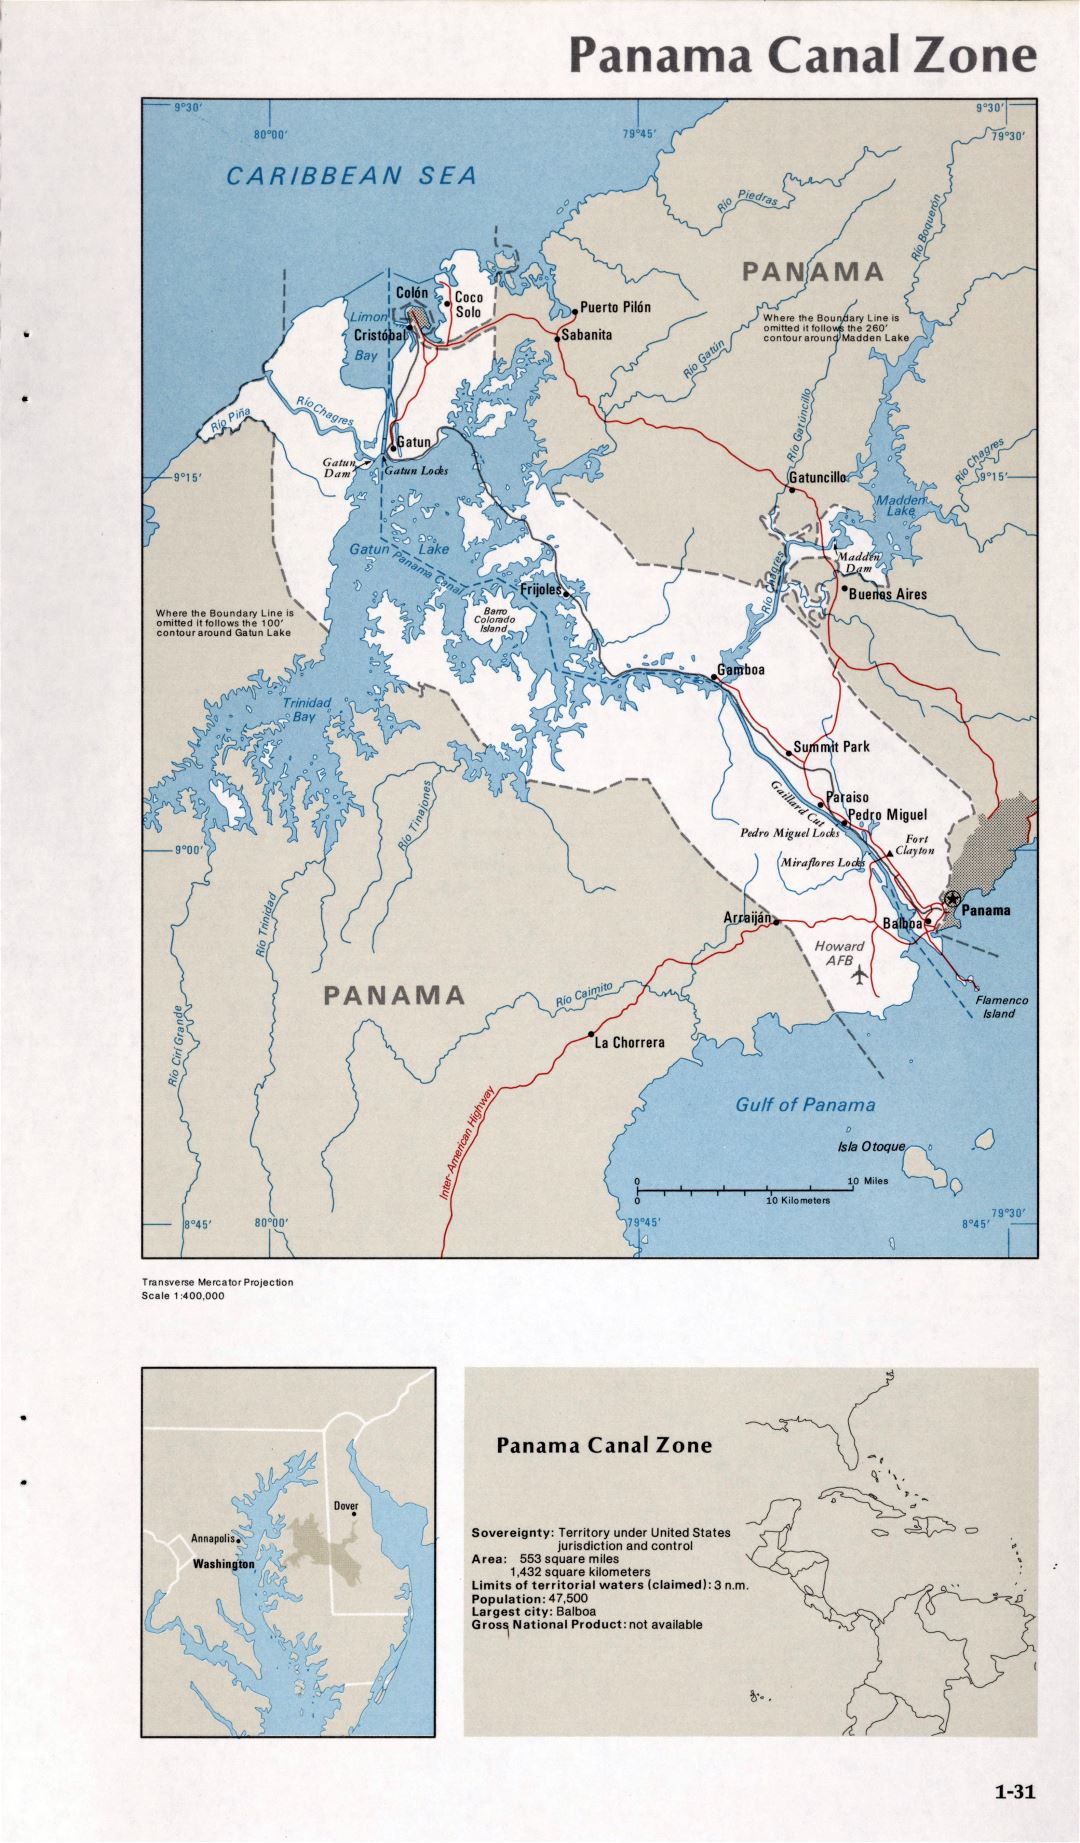 Map of Panama Canal Zone (1-31)